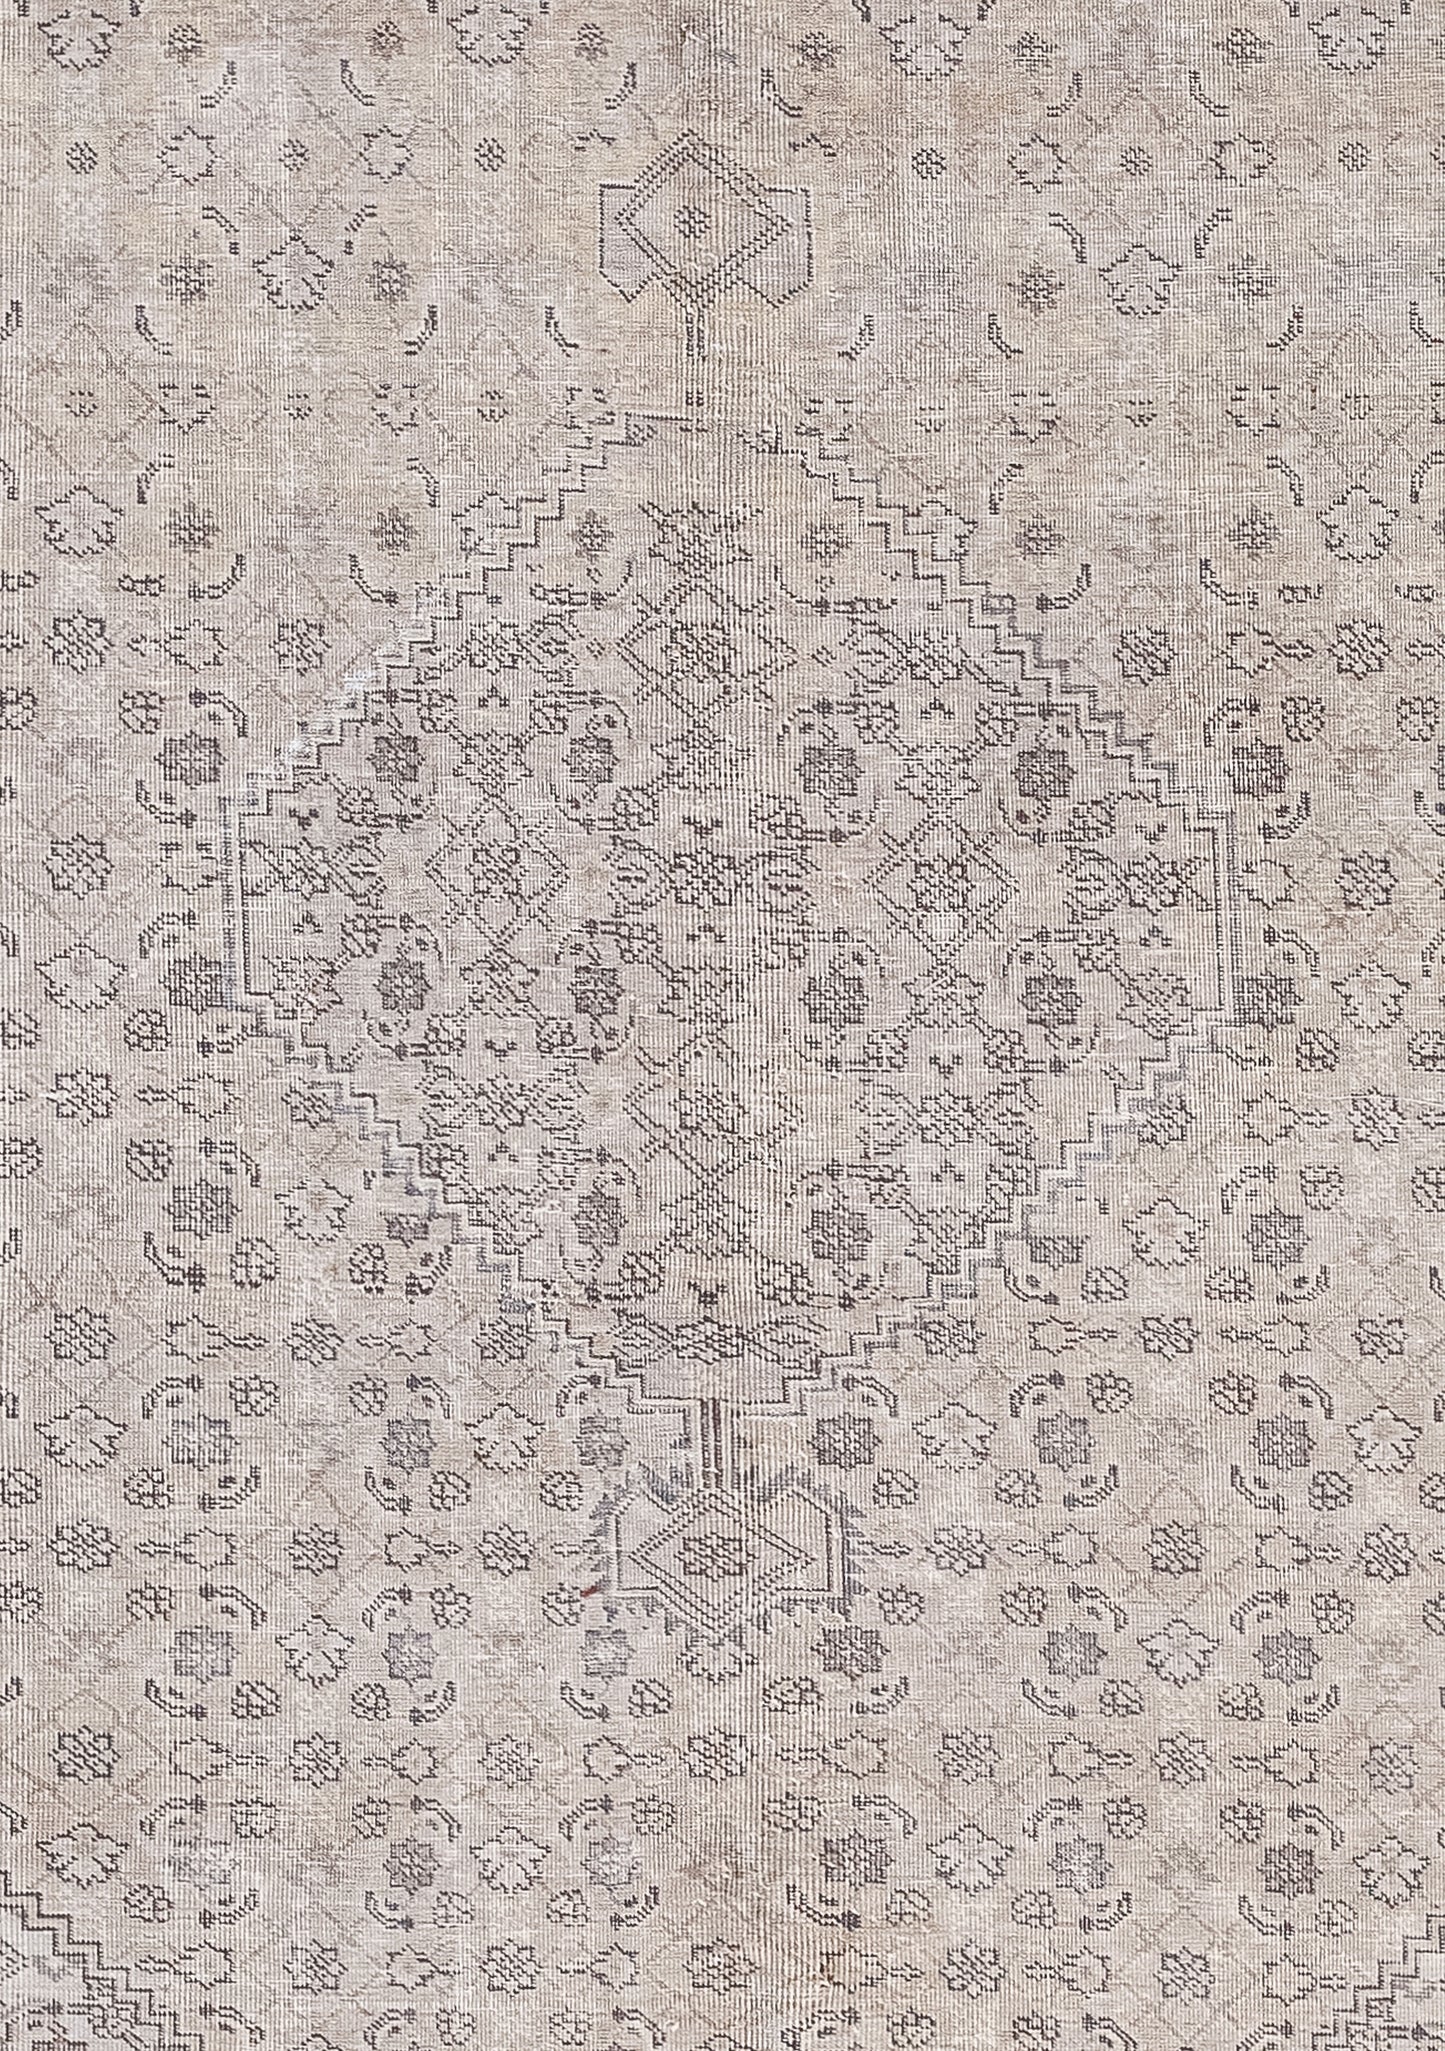 The center of the rug features diamond-shaped pyramids filled with rhombuses and tiny flowers. 